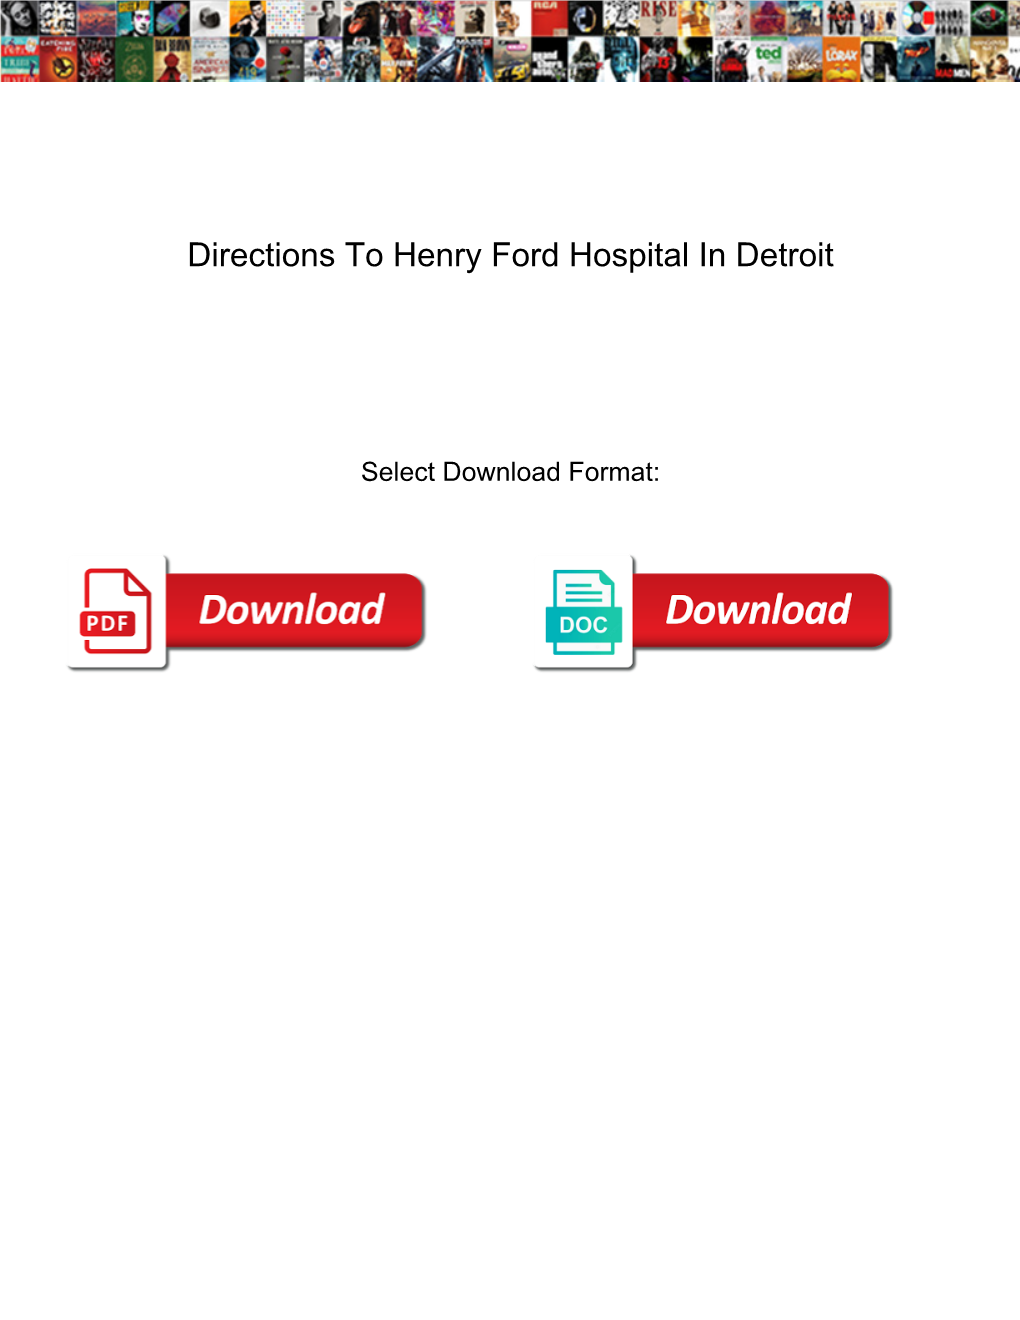 Directions to Henry Ford Hospital in Detroit